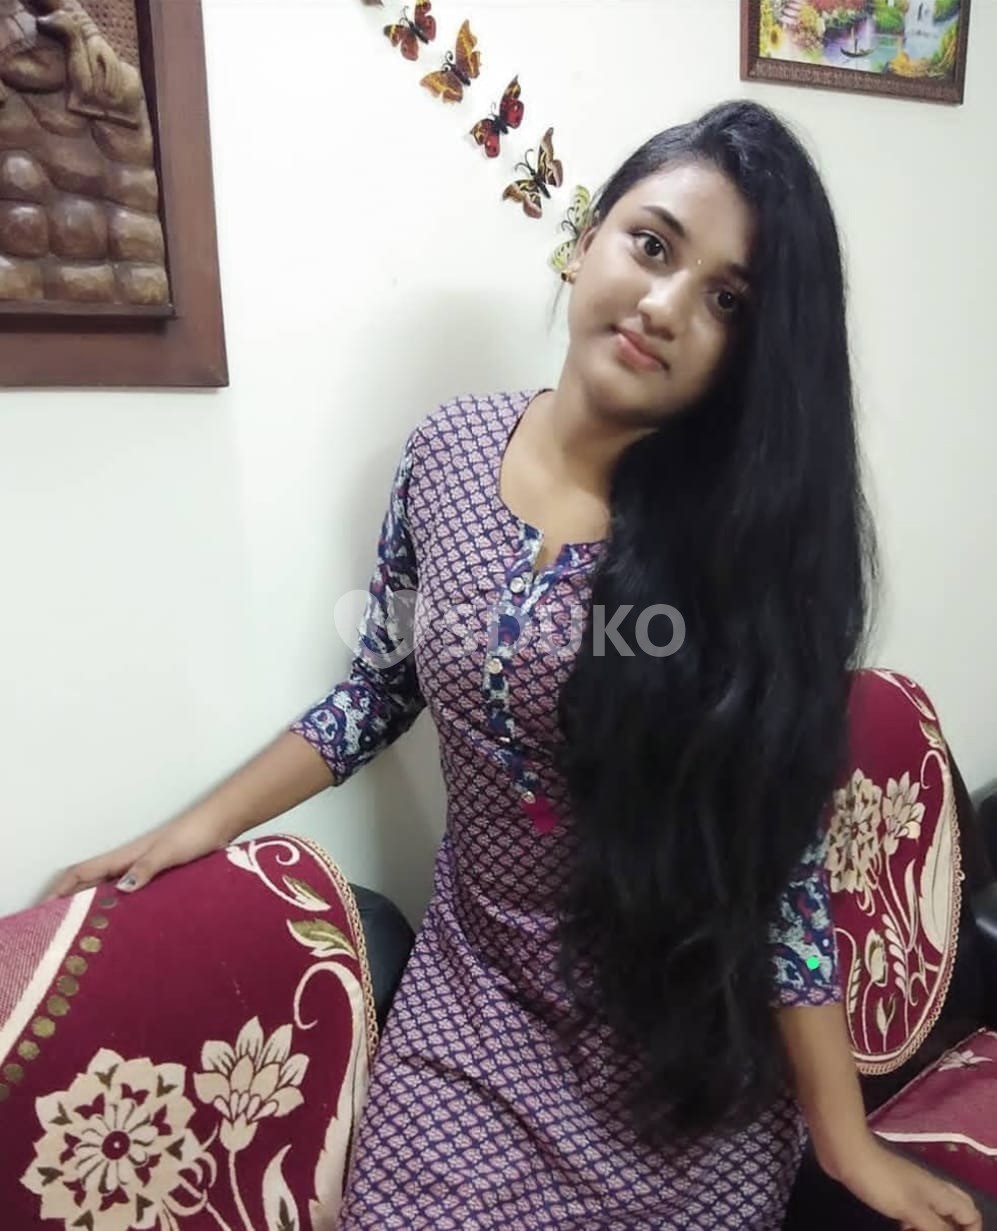 Koramangala low price 🥰 ...100% SAFE AND SECURE TODAY LOW PRICE UNLIMITED ENJOY HOT COLLEGE GIRL HOUSEWIFE AUNTIES AV